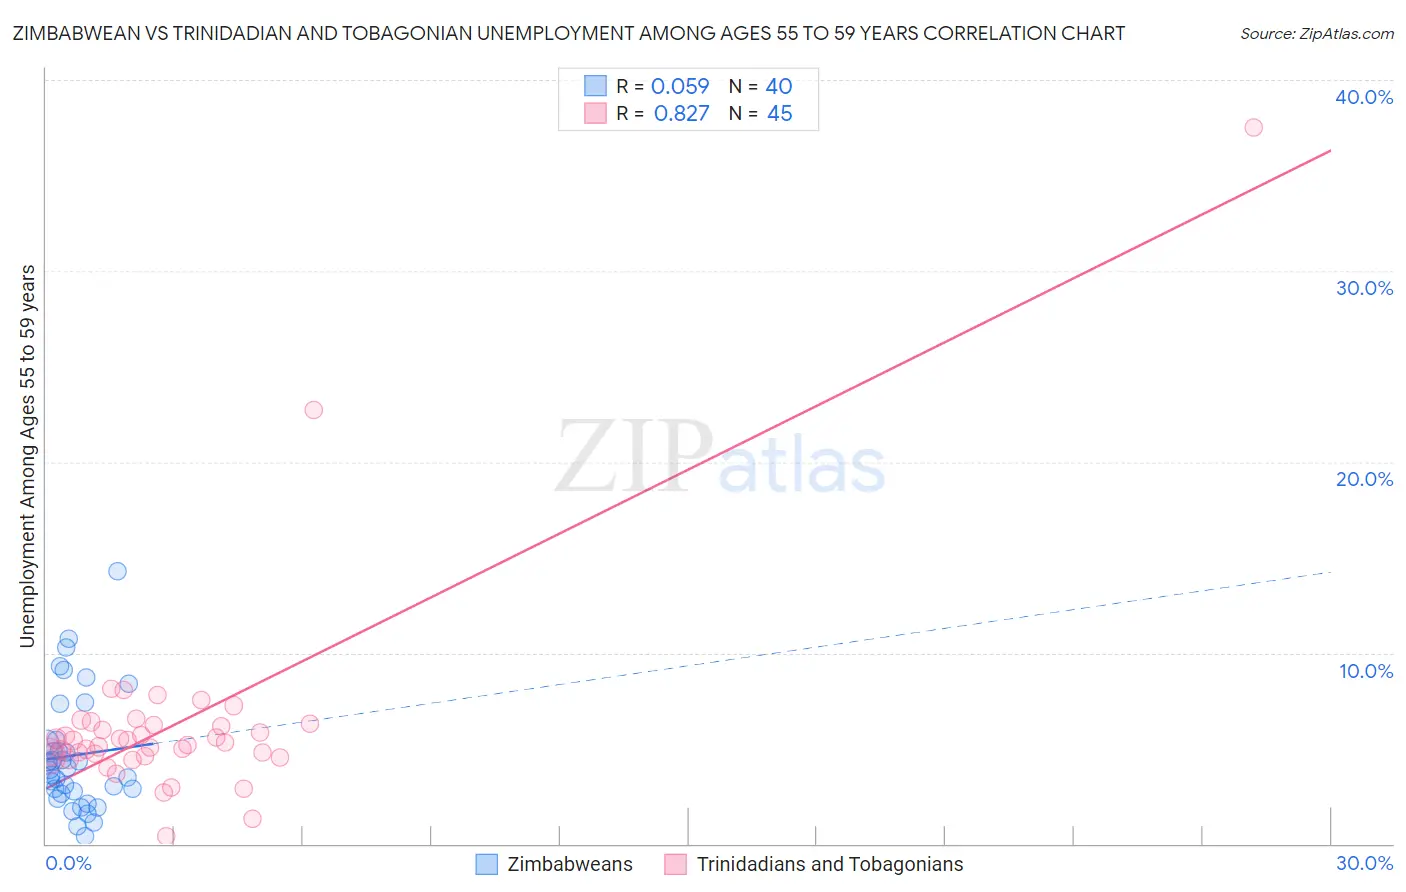 Zimbabwean vs Trinidadian and Tobagonian Unemployment Among Ages 55 to 59 years